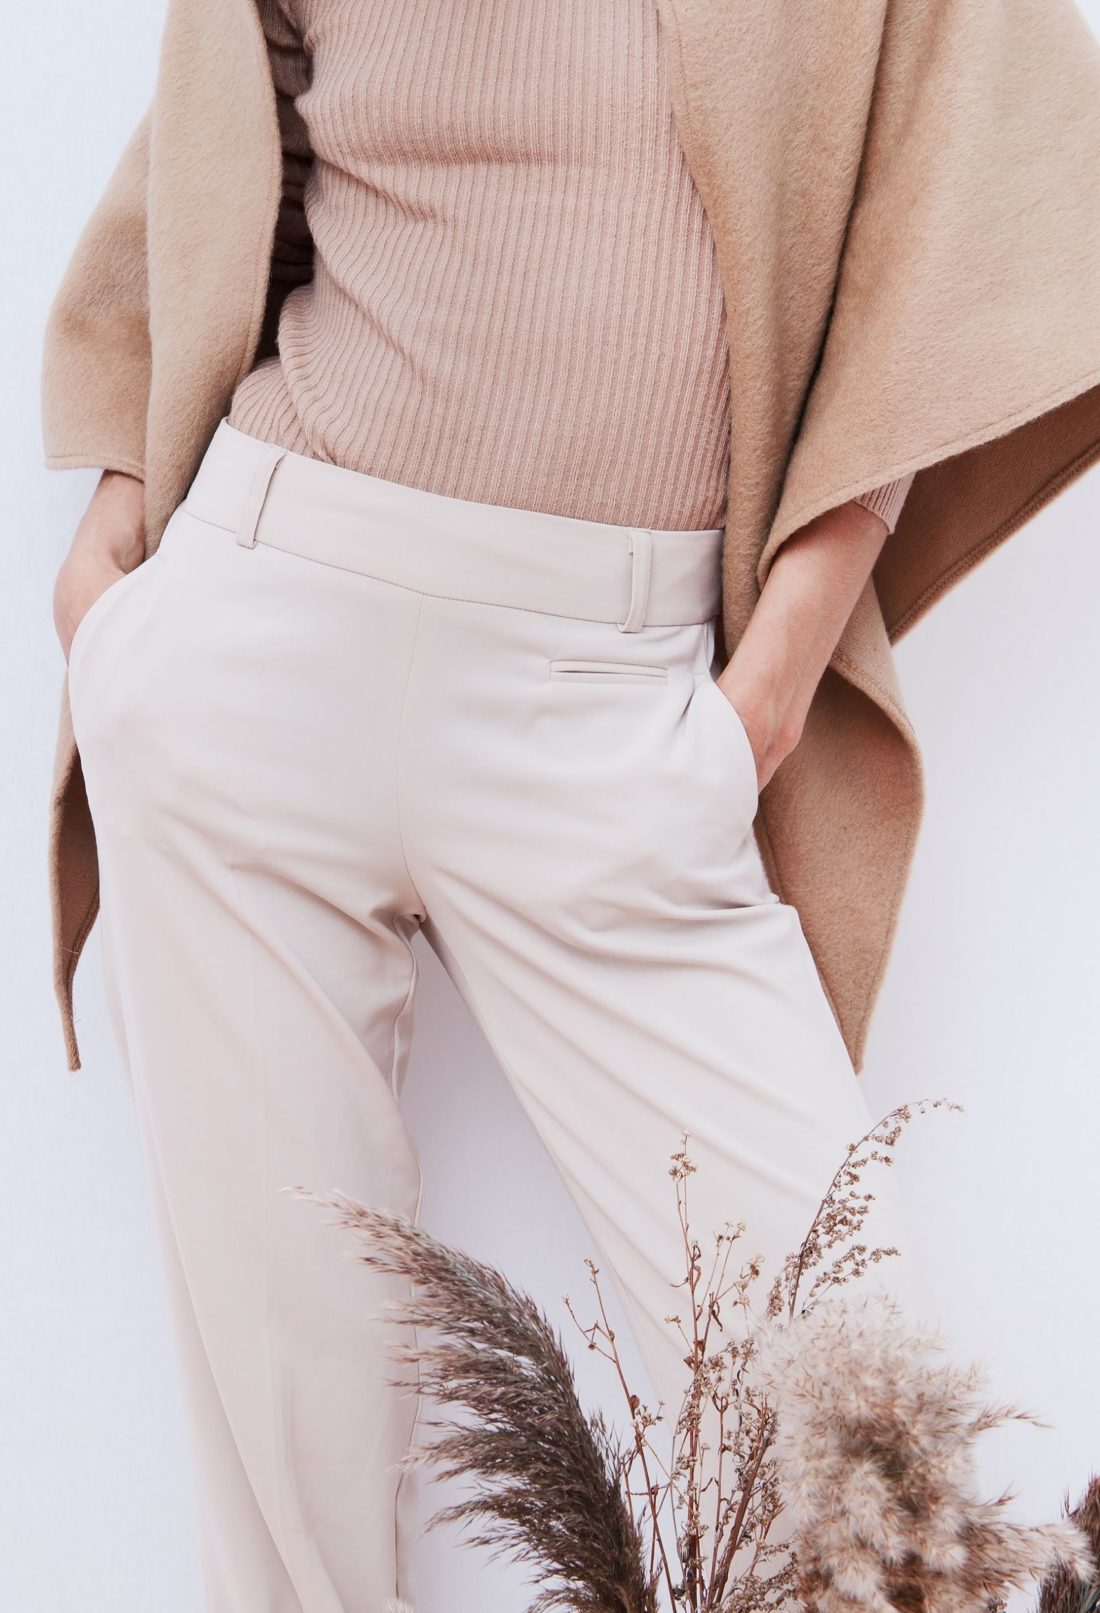 Top 5 Pants You Should Know About To Wear This Season